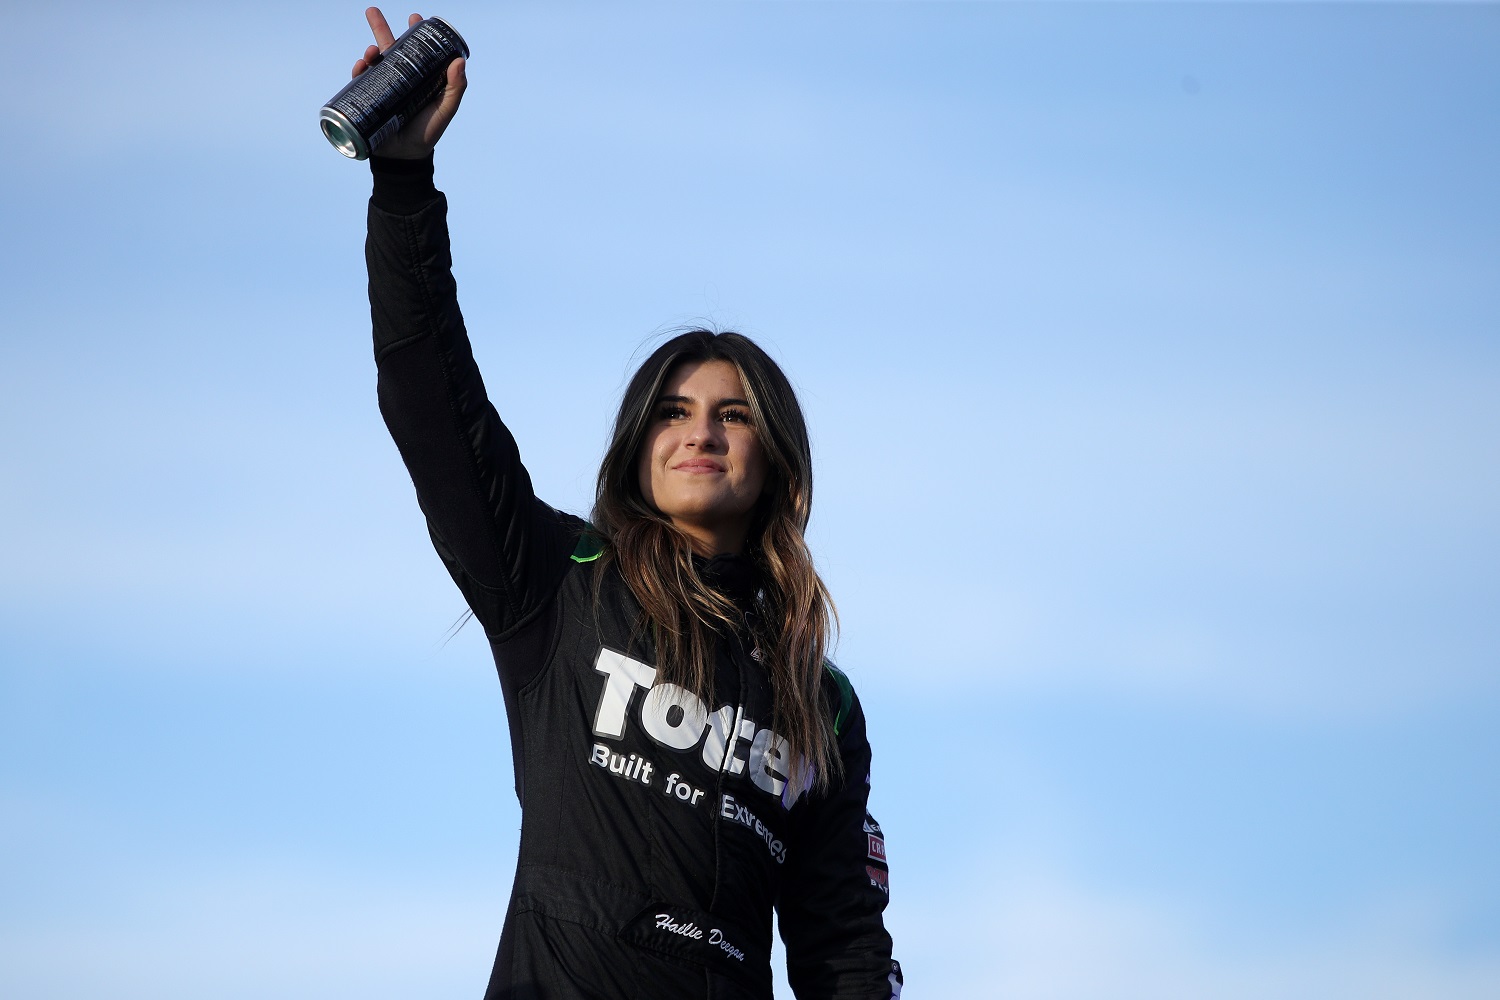 Hailie Deegan, driver of the No. 1 Ford, waves to fans prior to the NASCAR Camping World Truck Series Lucas Oil 150 at Phoenix Raceway on Nov. 5, 2021. | Sean Gardner/Getty Images